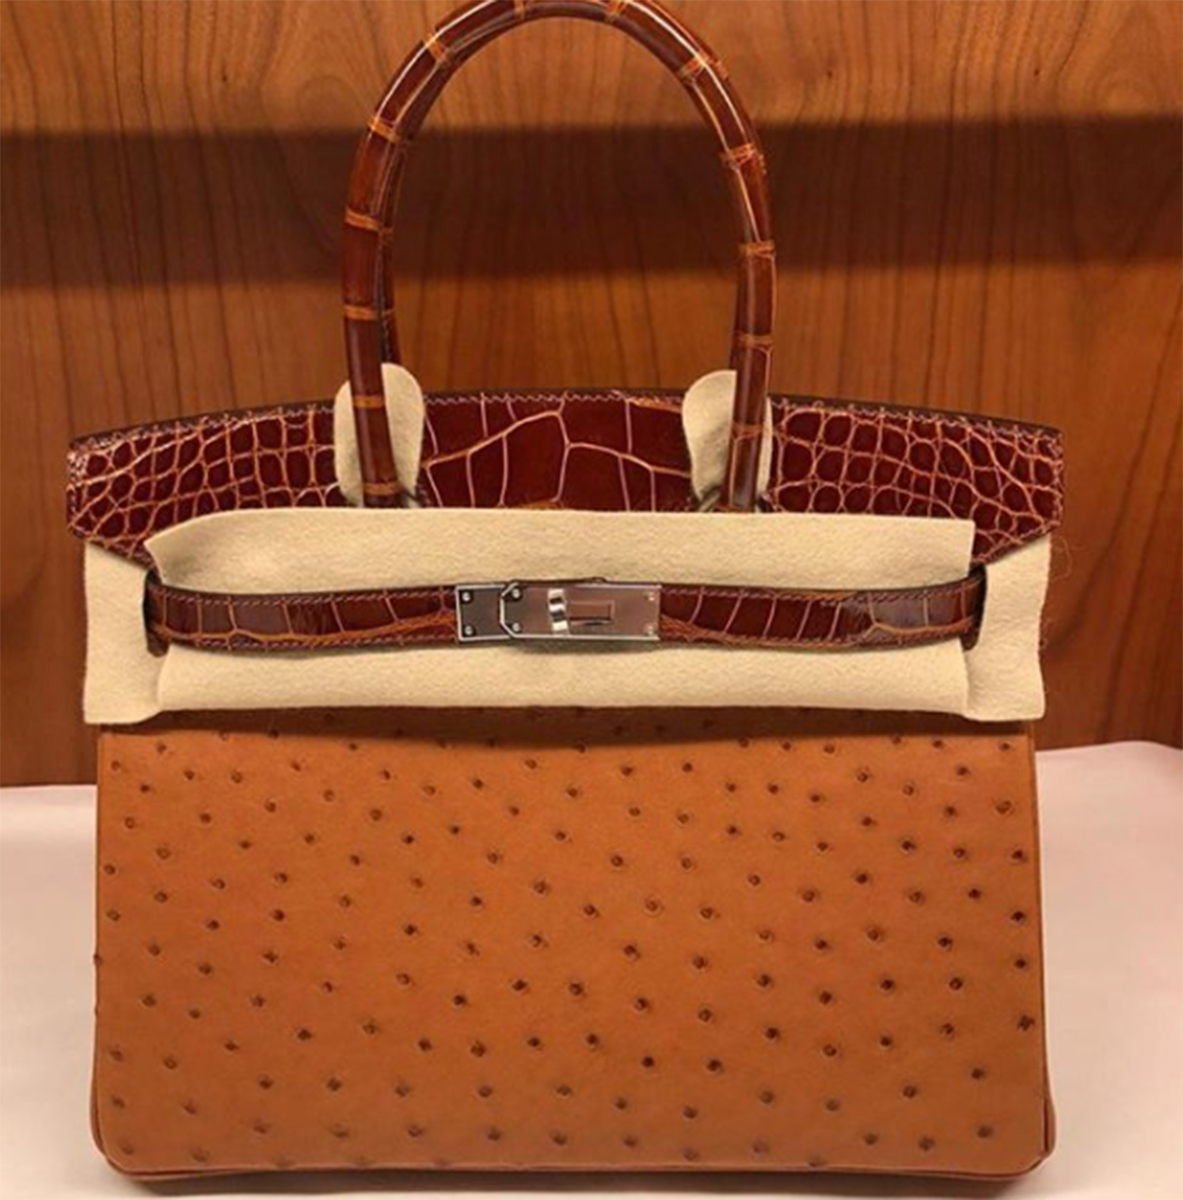 A 30cm Birkin in Cognac Ostrich and Miel Croc with PHW from October 2020. Photo via TPFer @Orangebox7.